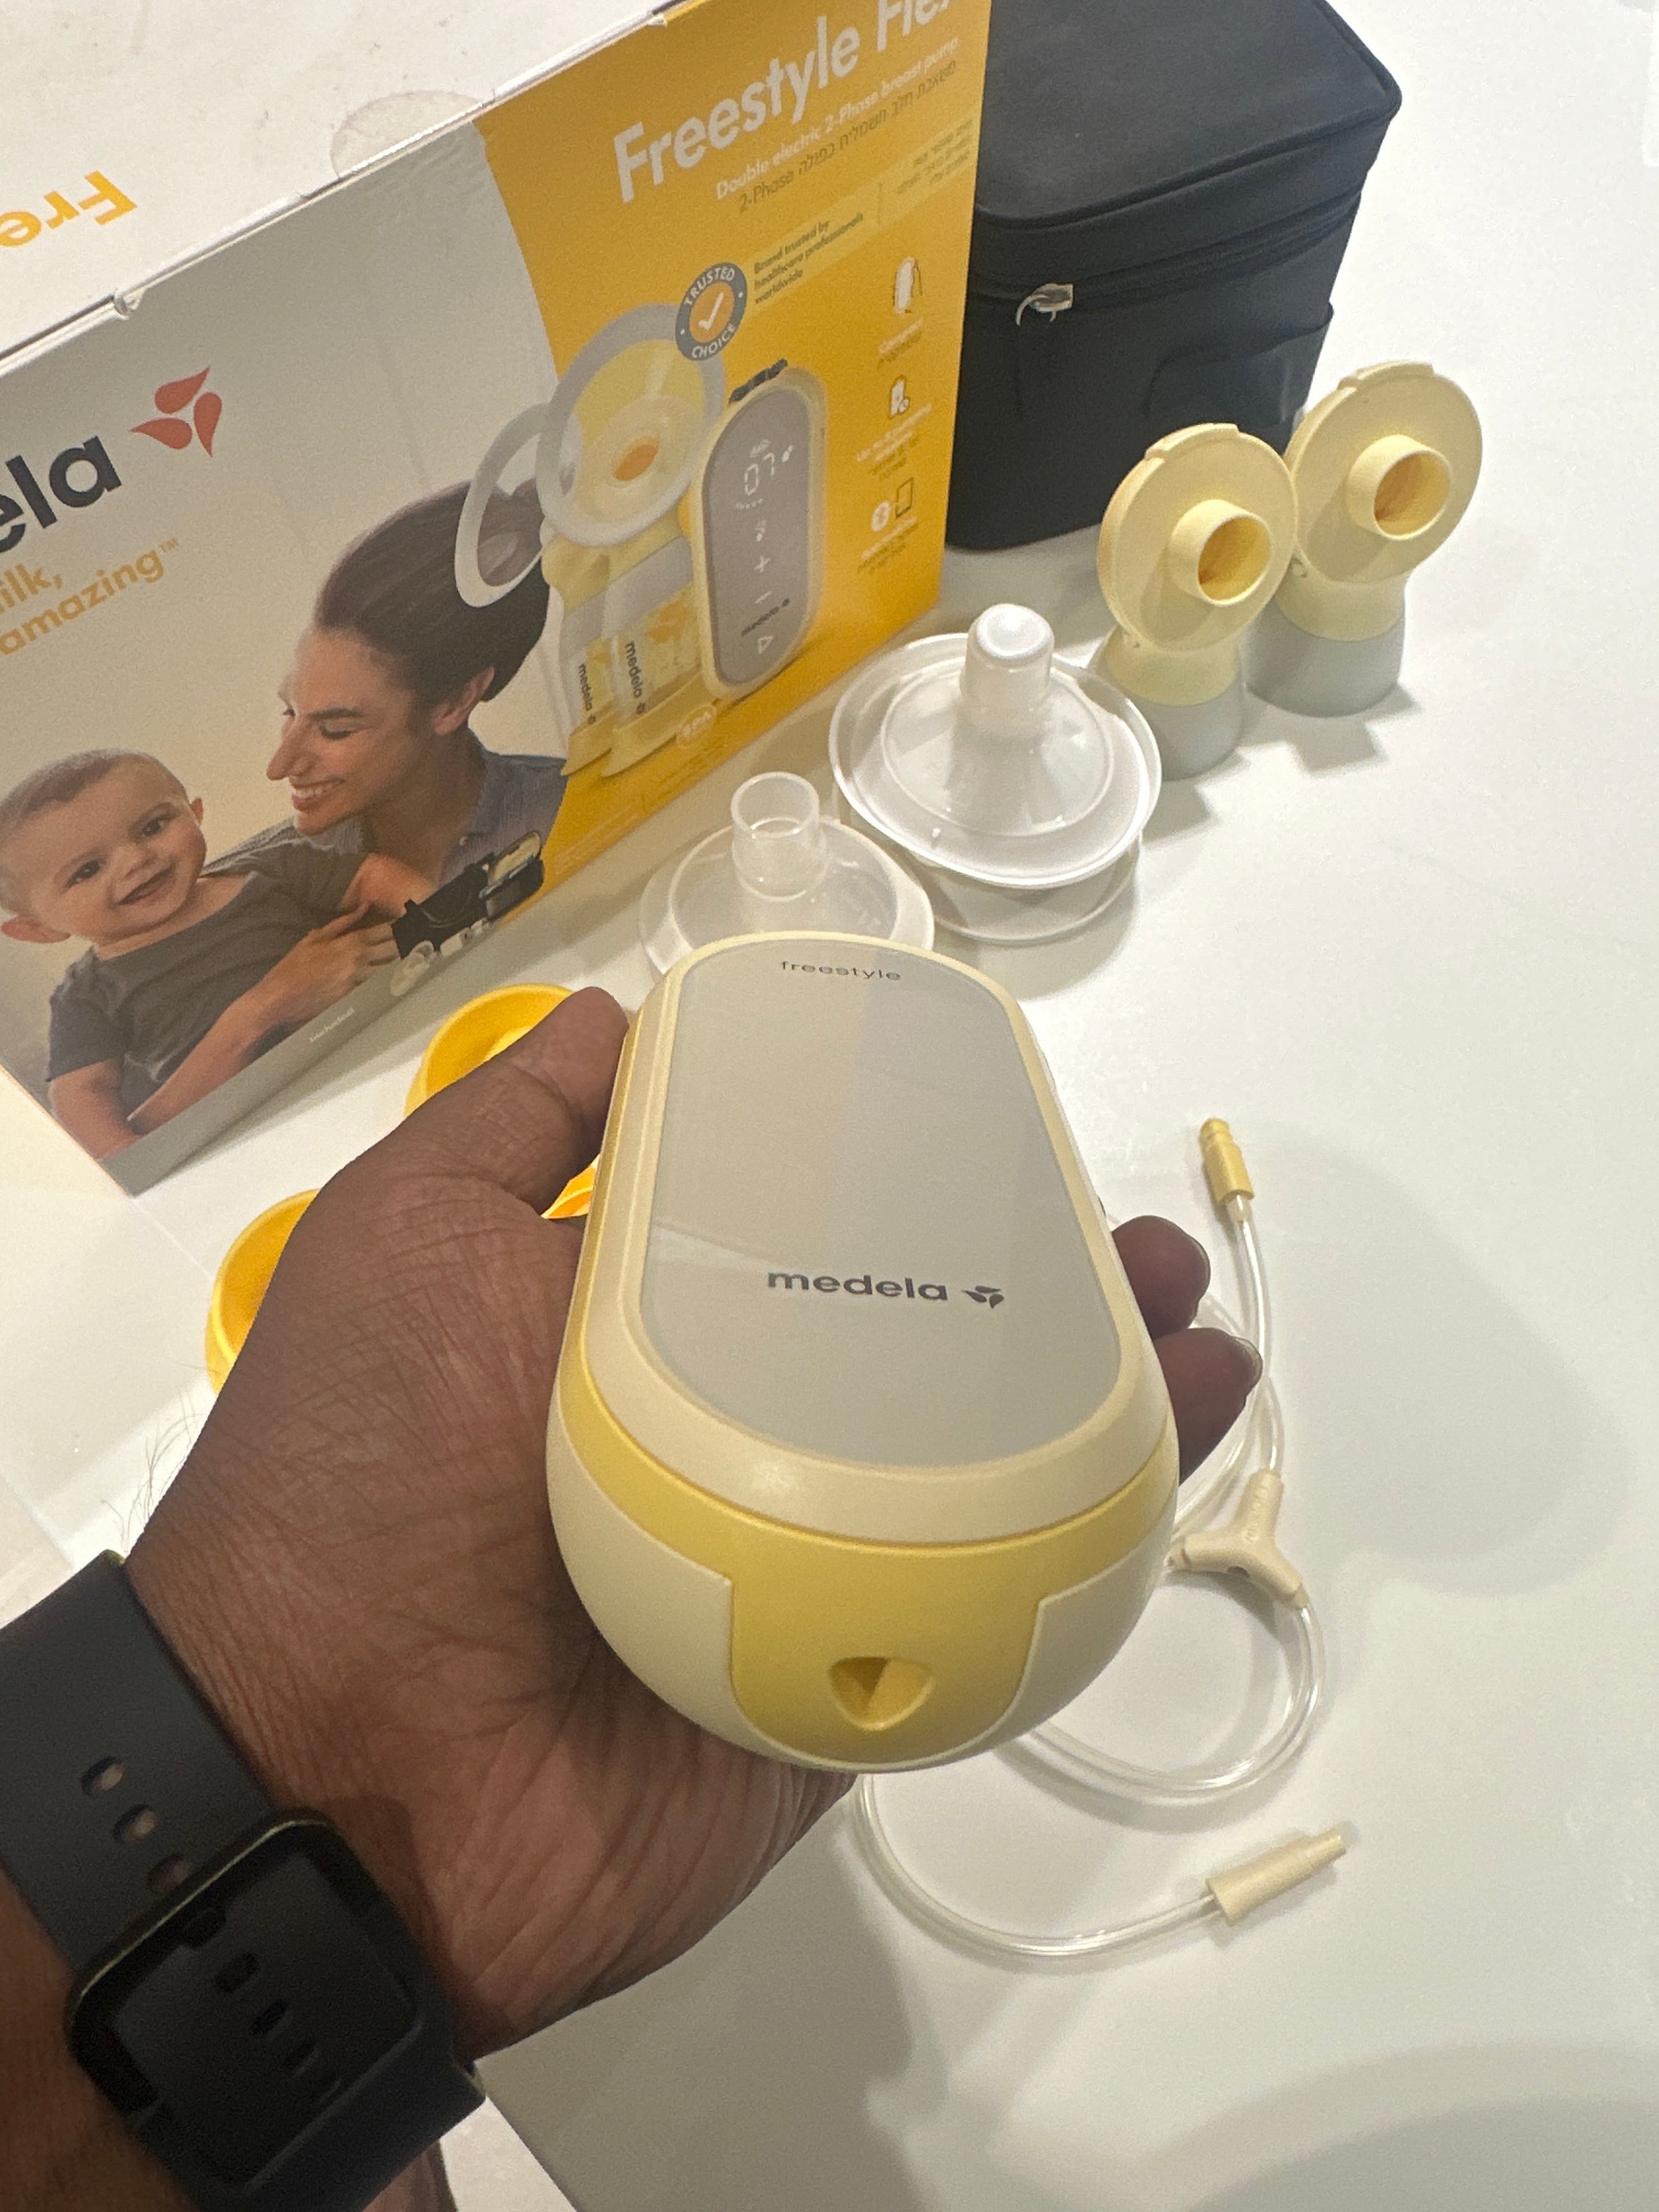 Medela India Private Limited 